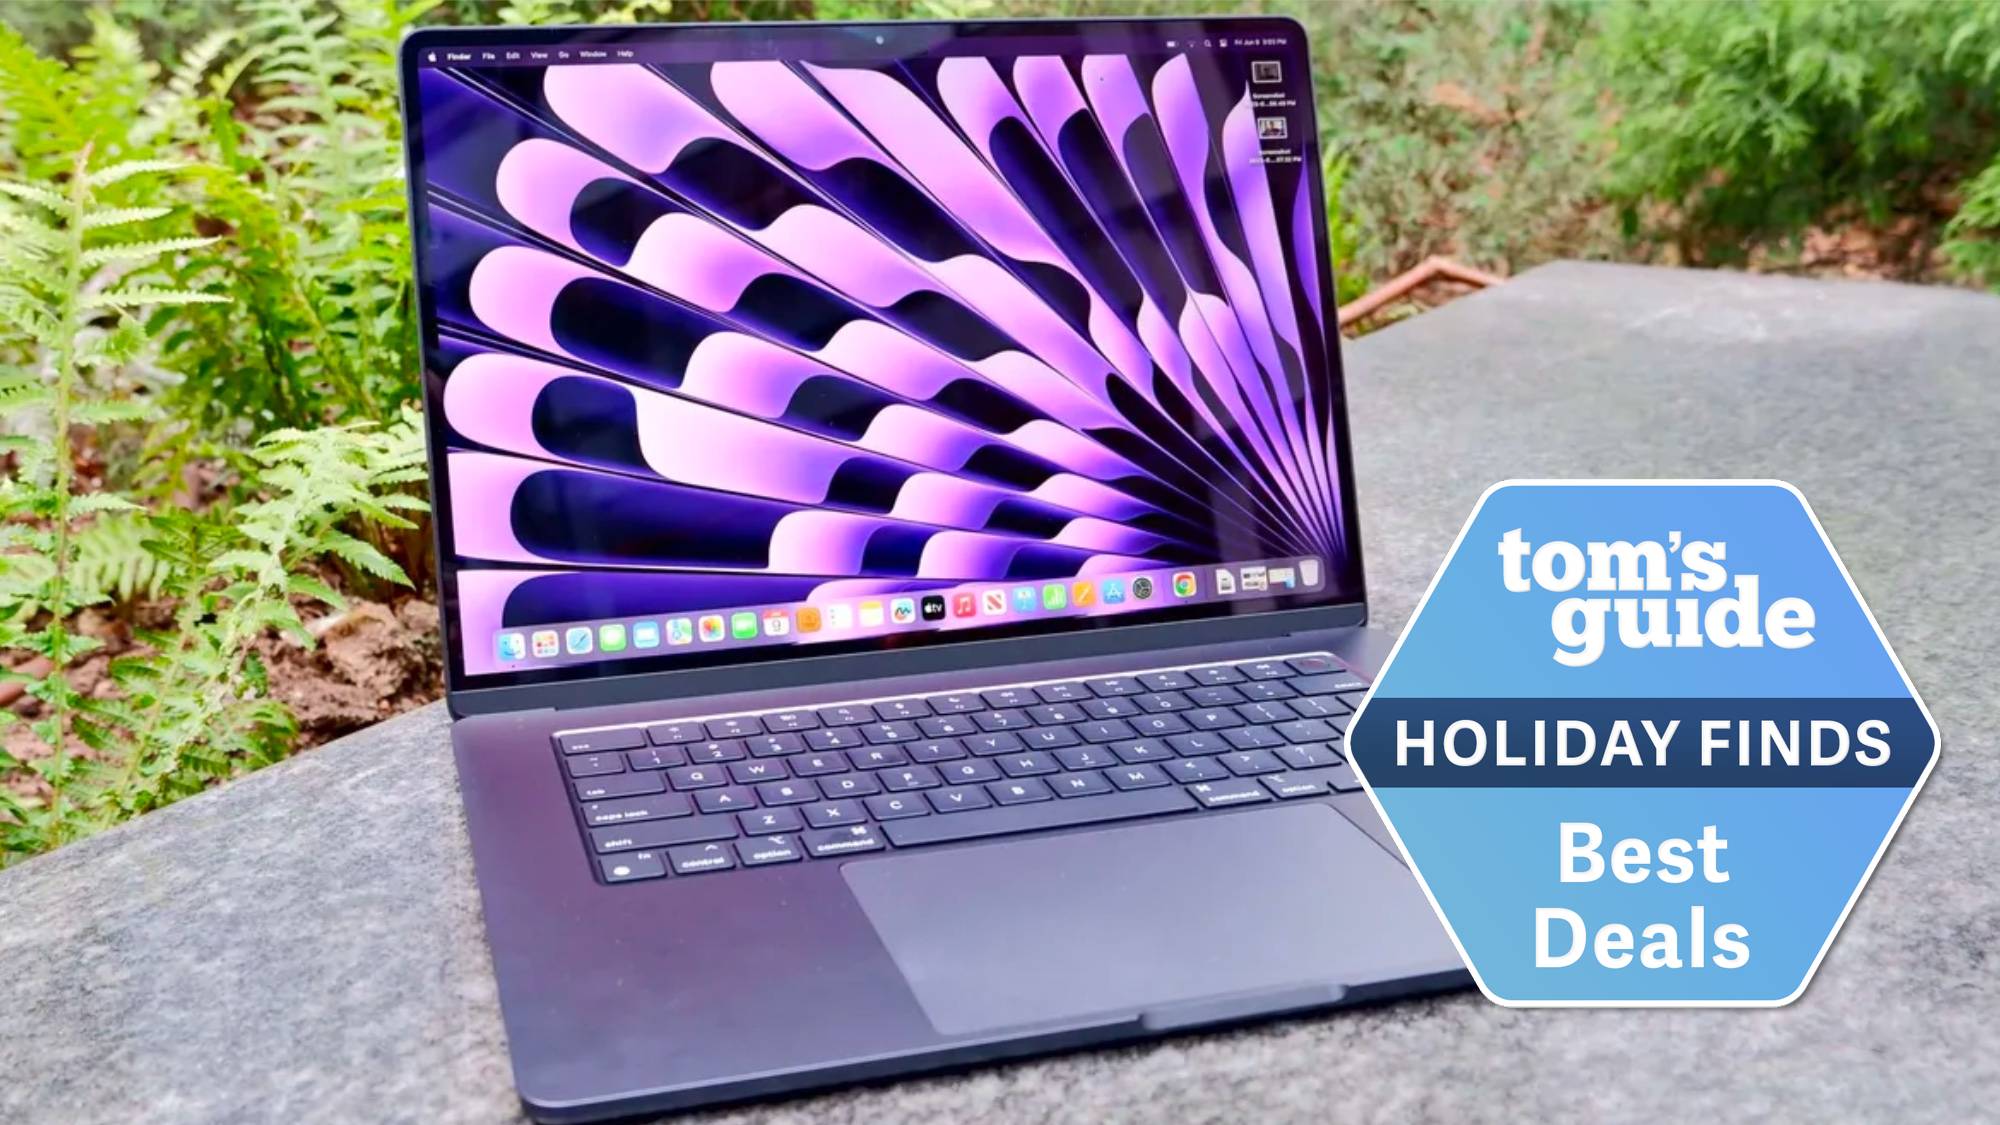 Huge holiday laptop deals — save on MacBooks, Dell XPS and more before